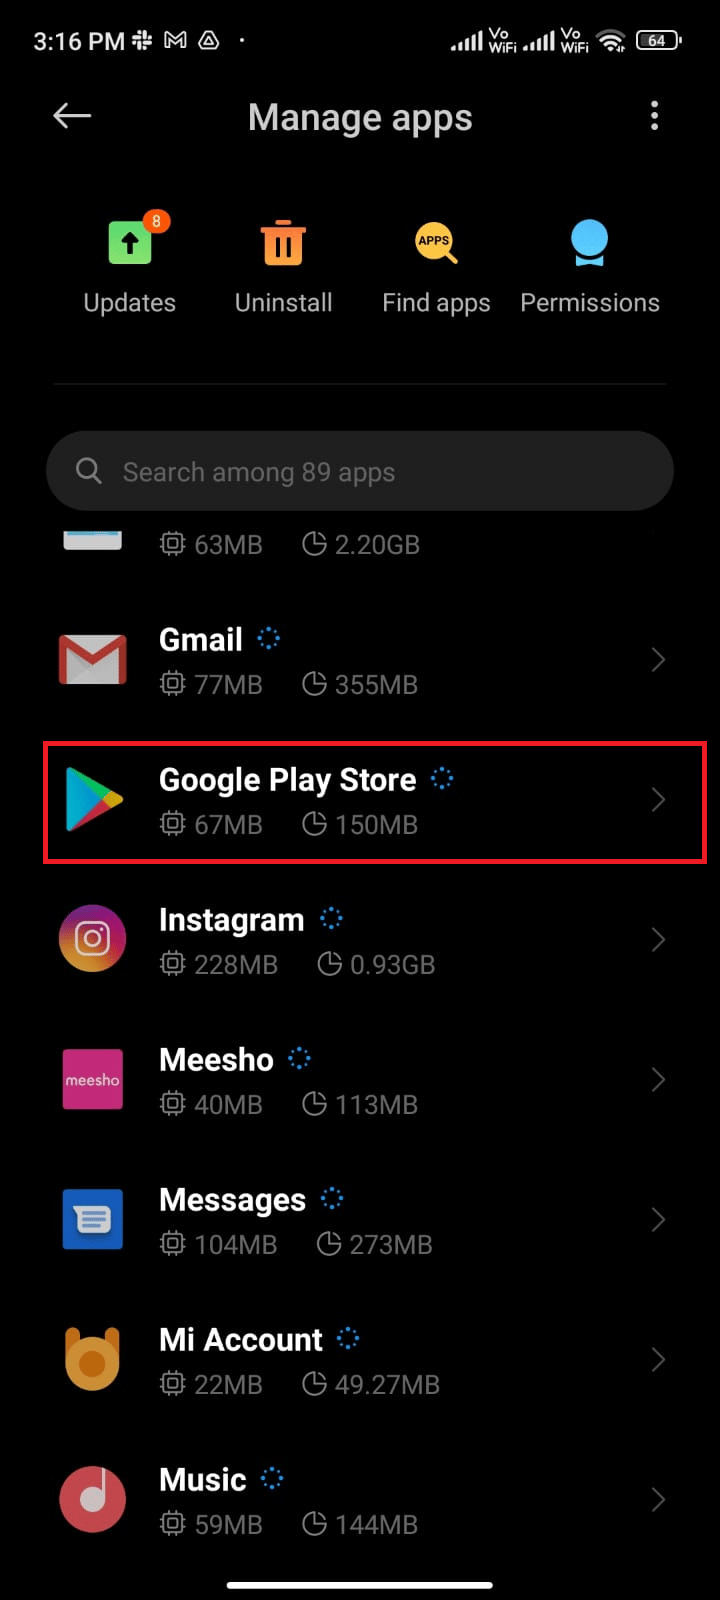 tap on Manage apps and then Google Play Store